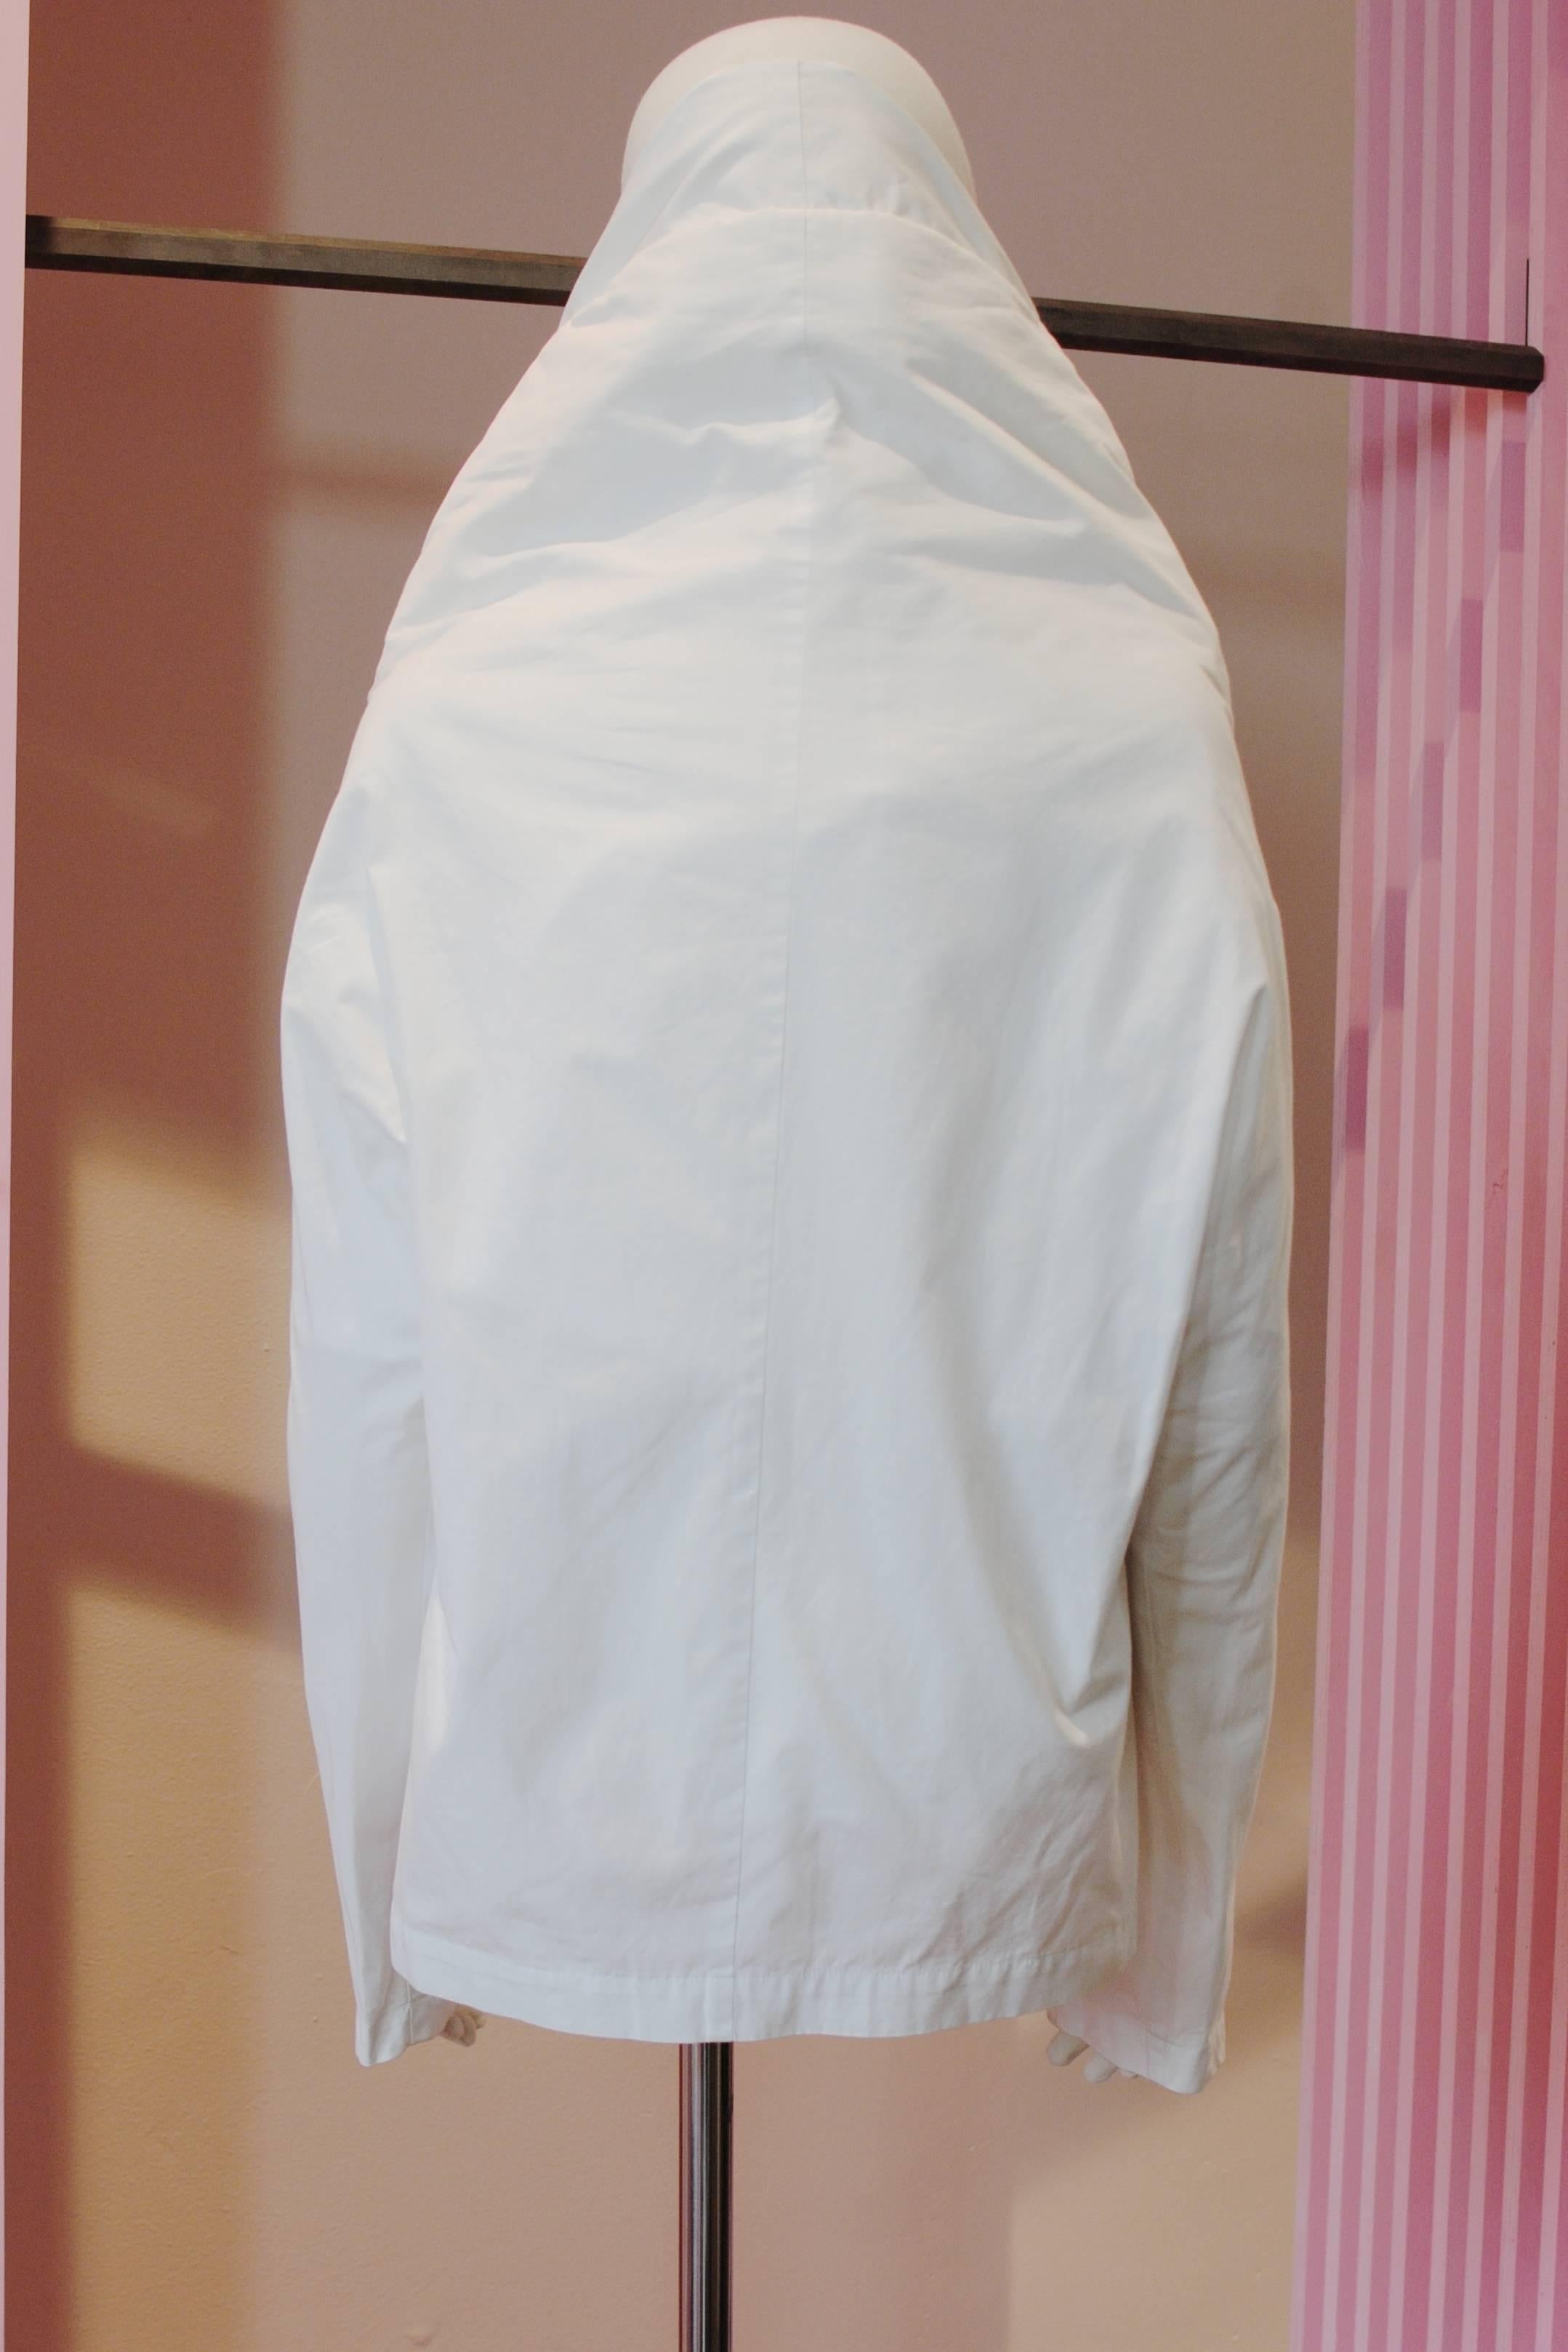 1996 COMME des GARÇONS White Cocoon Top In Excellent Condition For Sale In Melbourne, Victoria